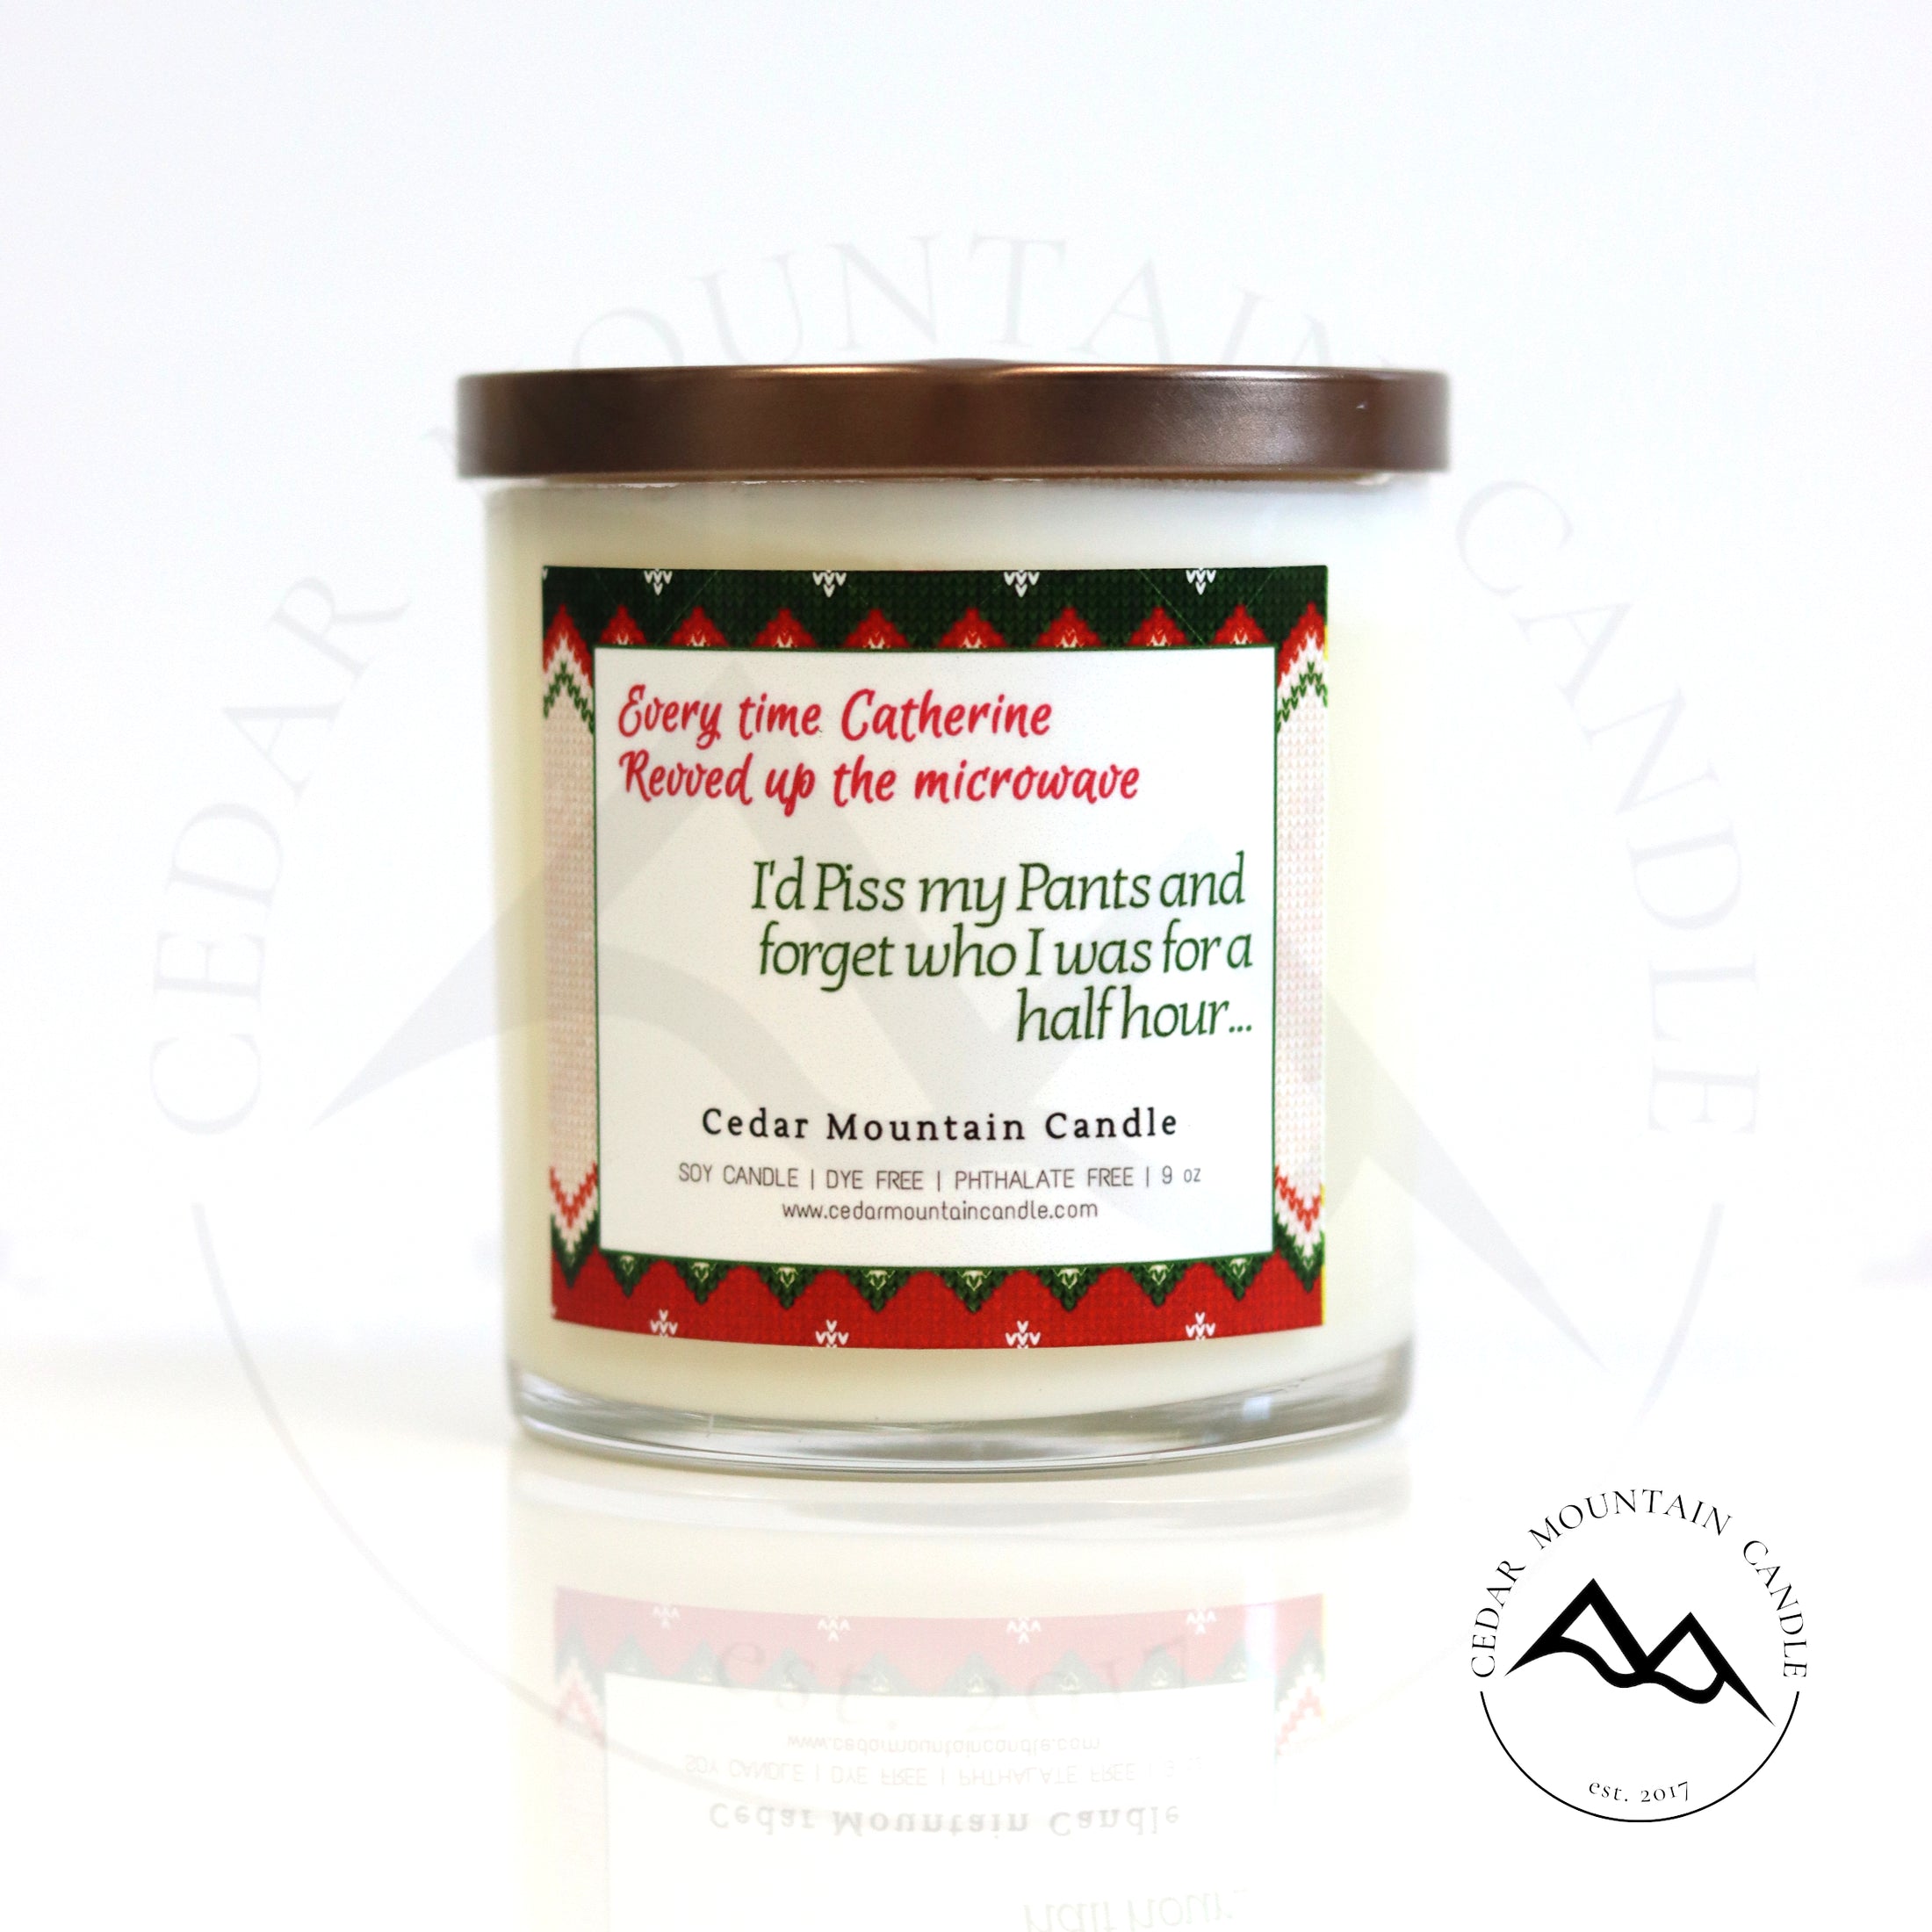 Every time Catherine Revved Up the Microwave - Griswold Collection Soy Candle